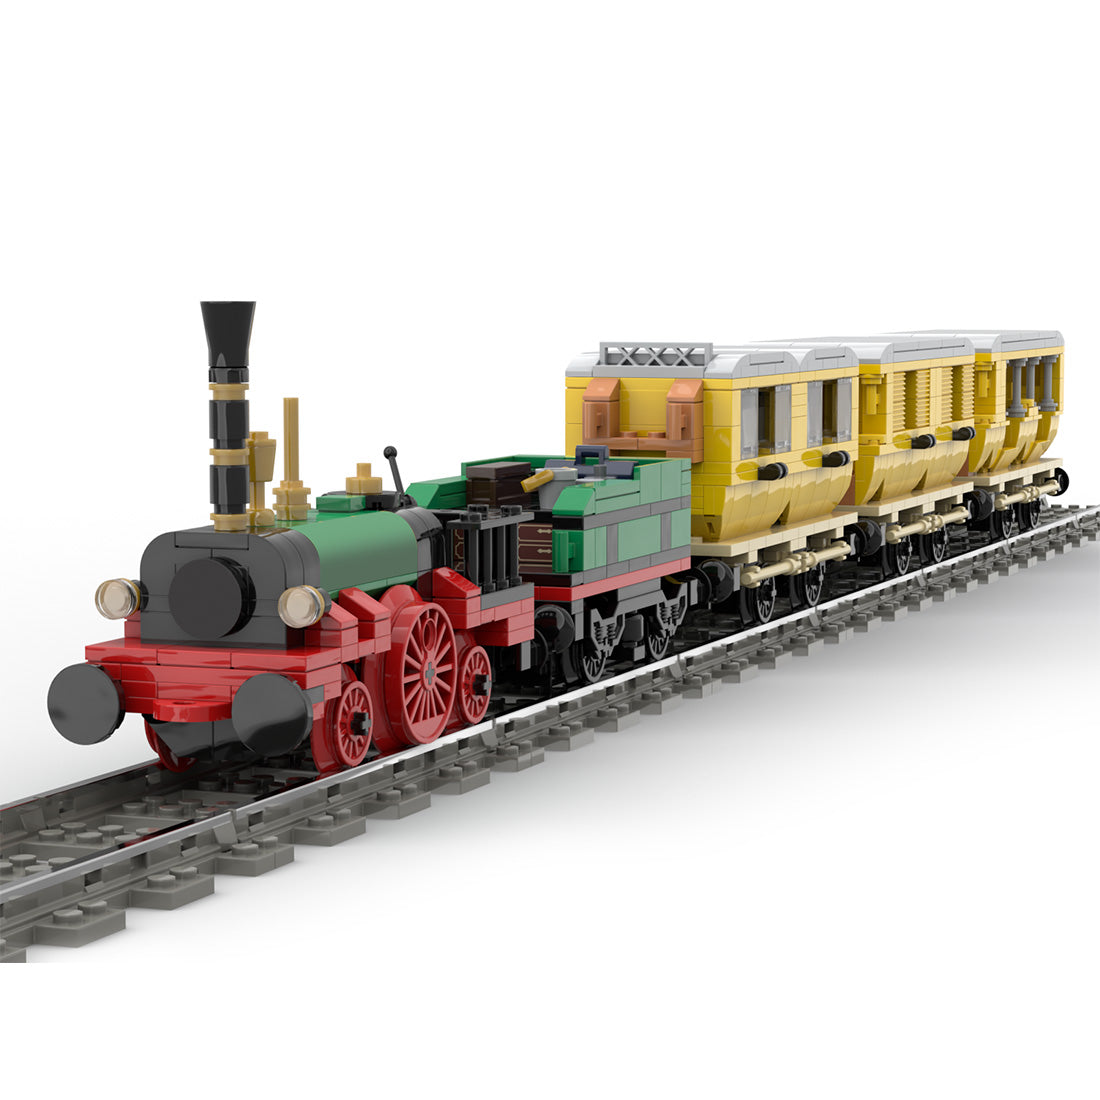 MOC-63396 The Adler – Germany’s first commercial train